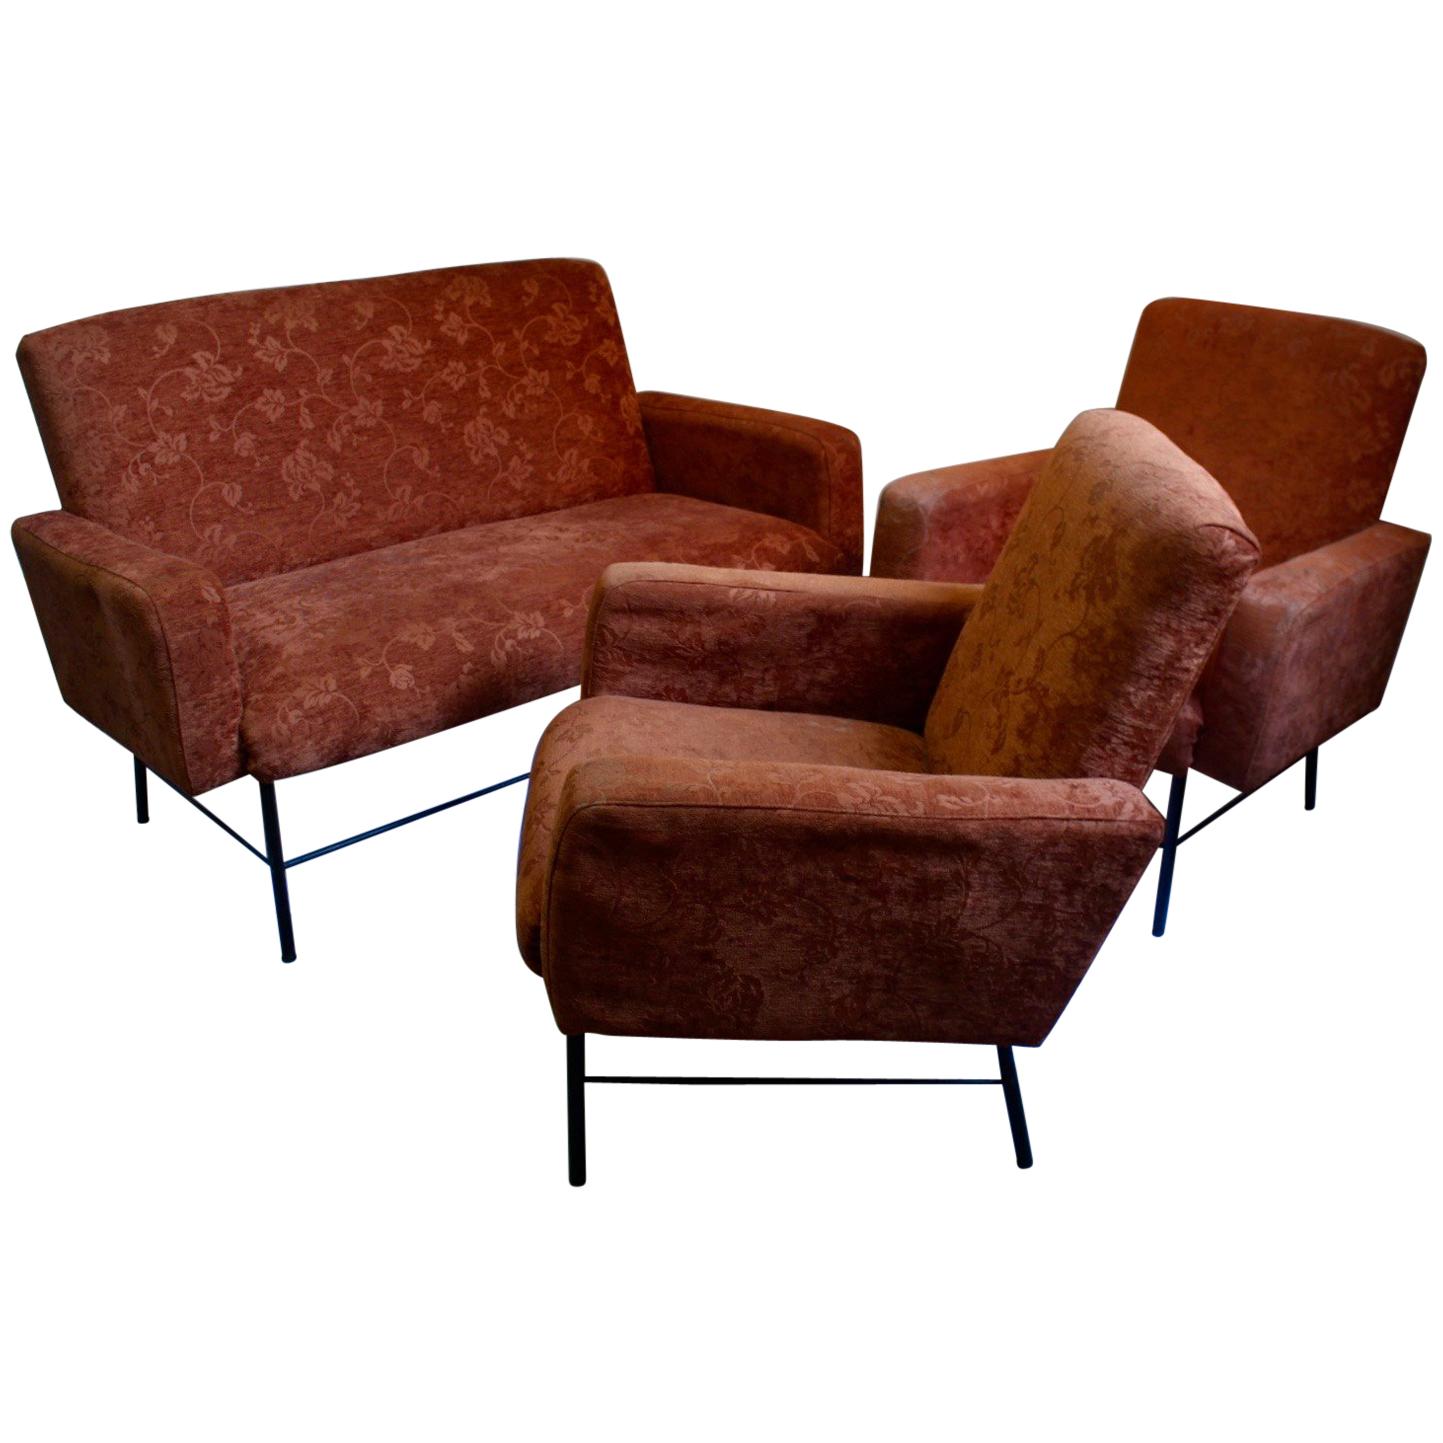   Midcentury Rationalist Living Room Lounge Armchair Set with Metal Legs, 1960s For Sale